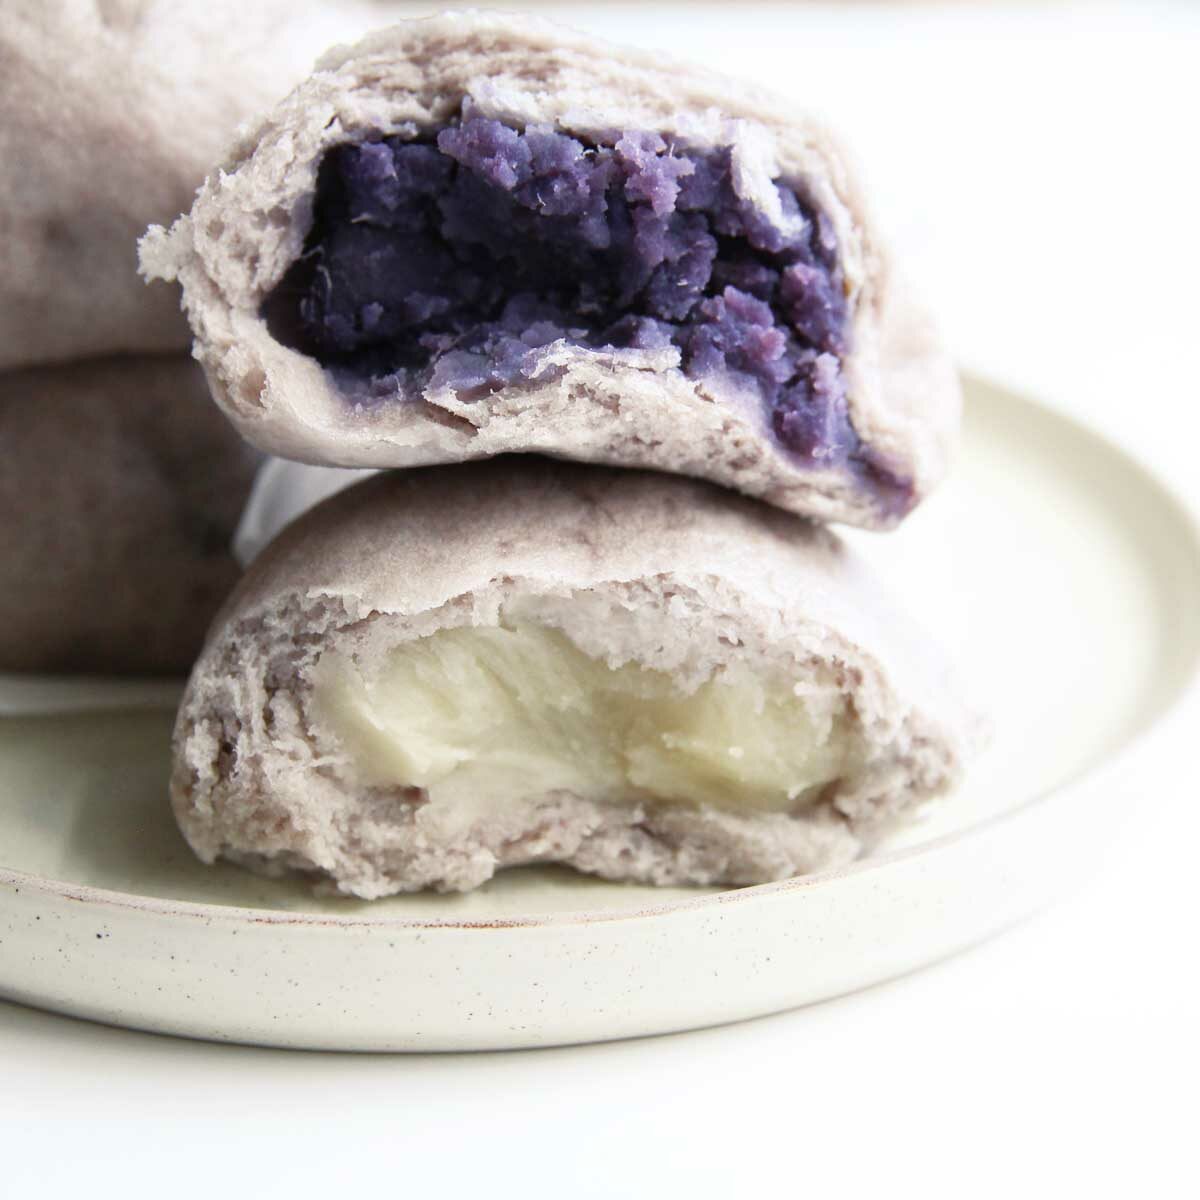 How to Make Purple Sweet Potato Steamed Buns (Healthy Vegan Recipe!) with filling variations